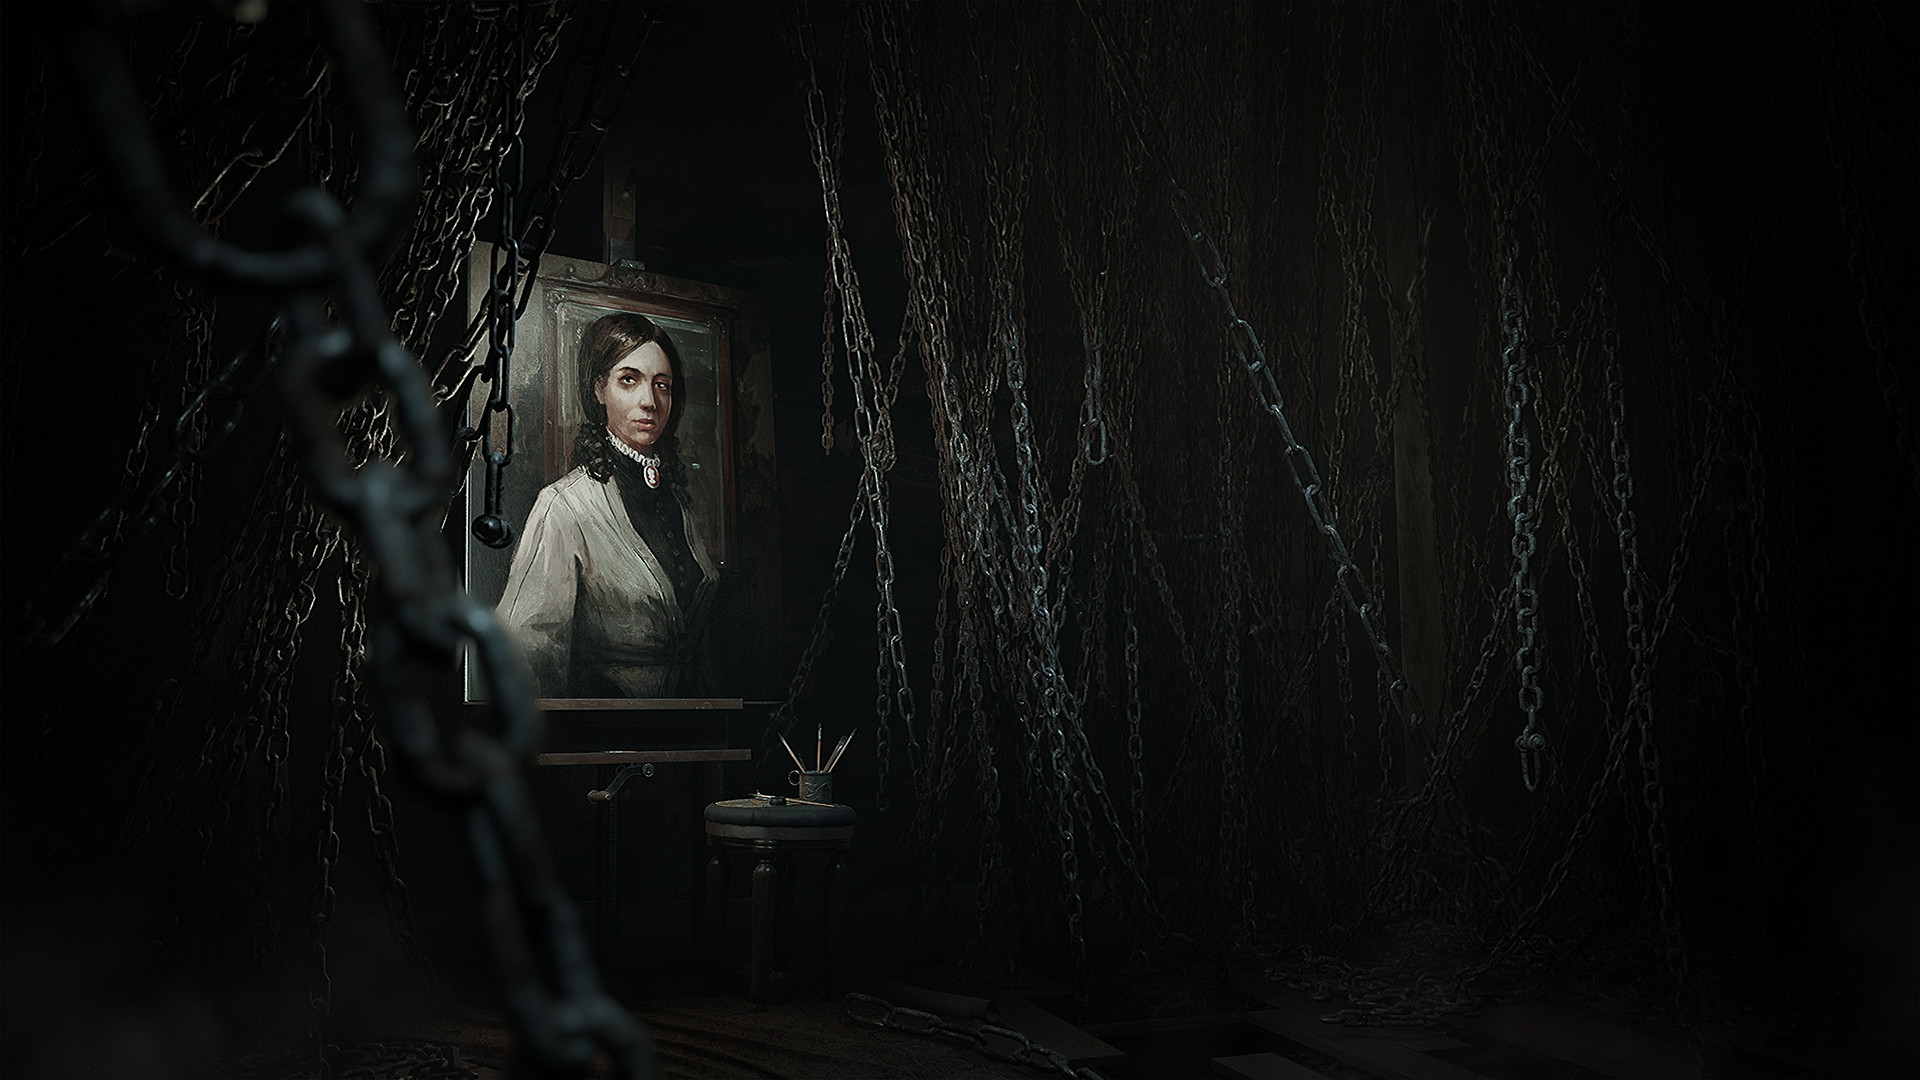 Tải game Layers of Fear miễn phí